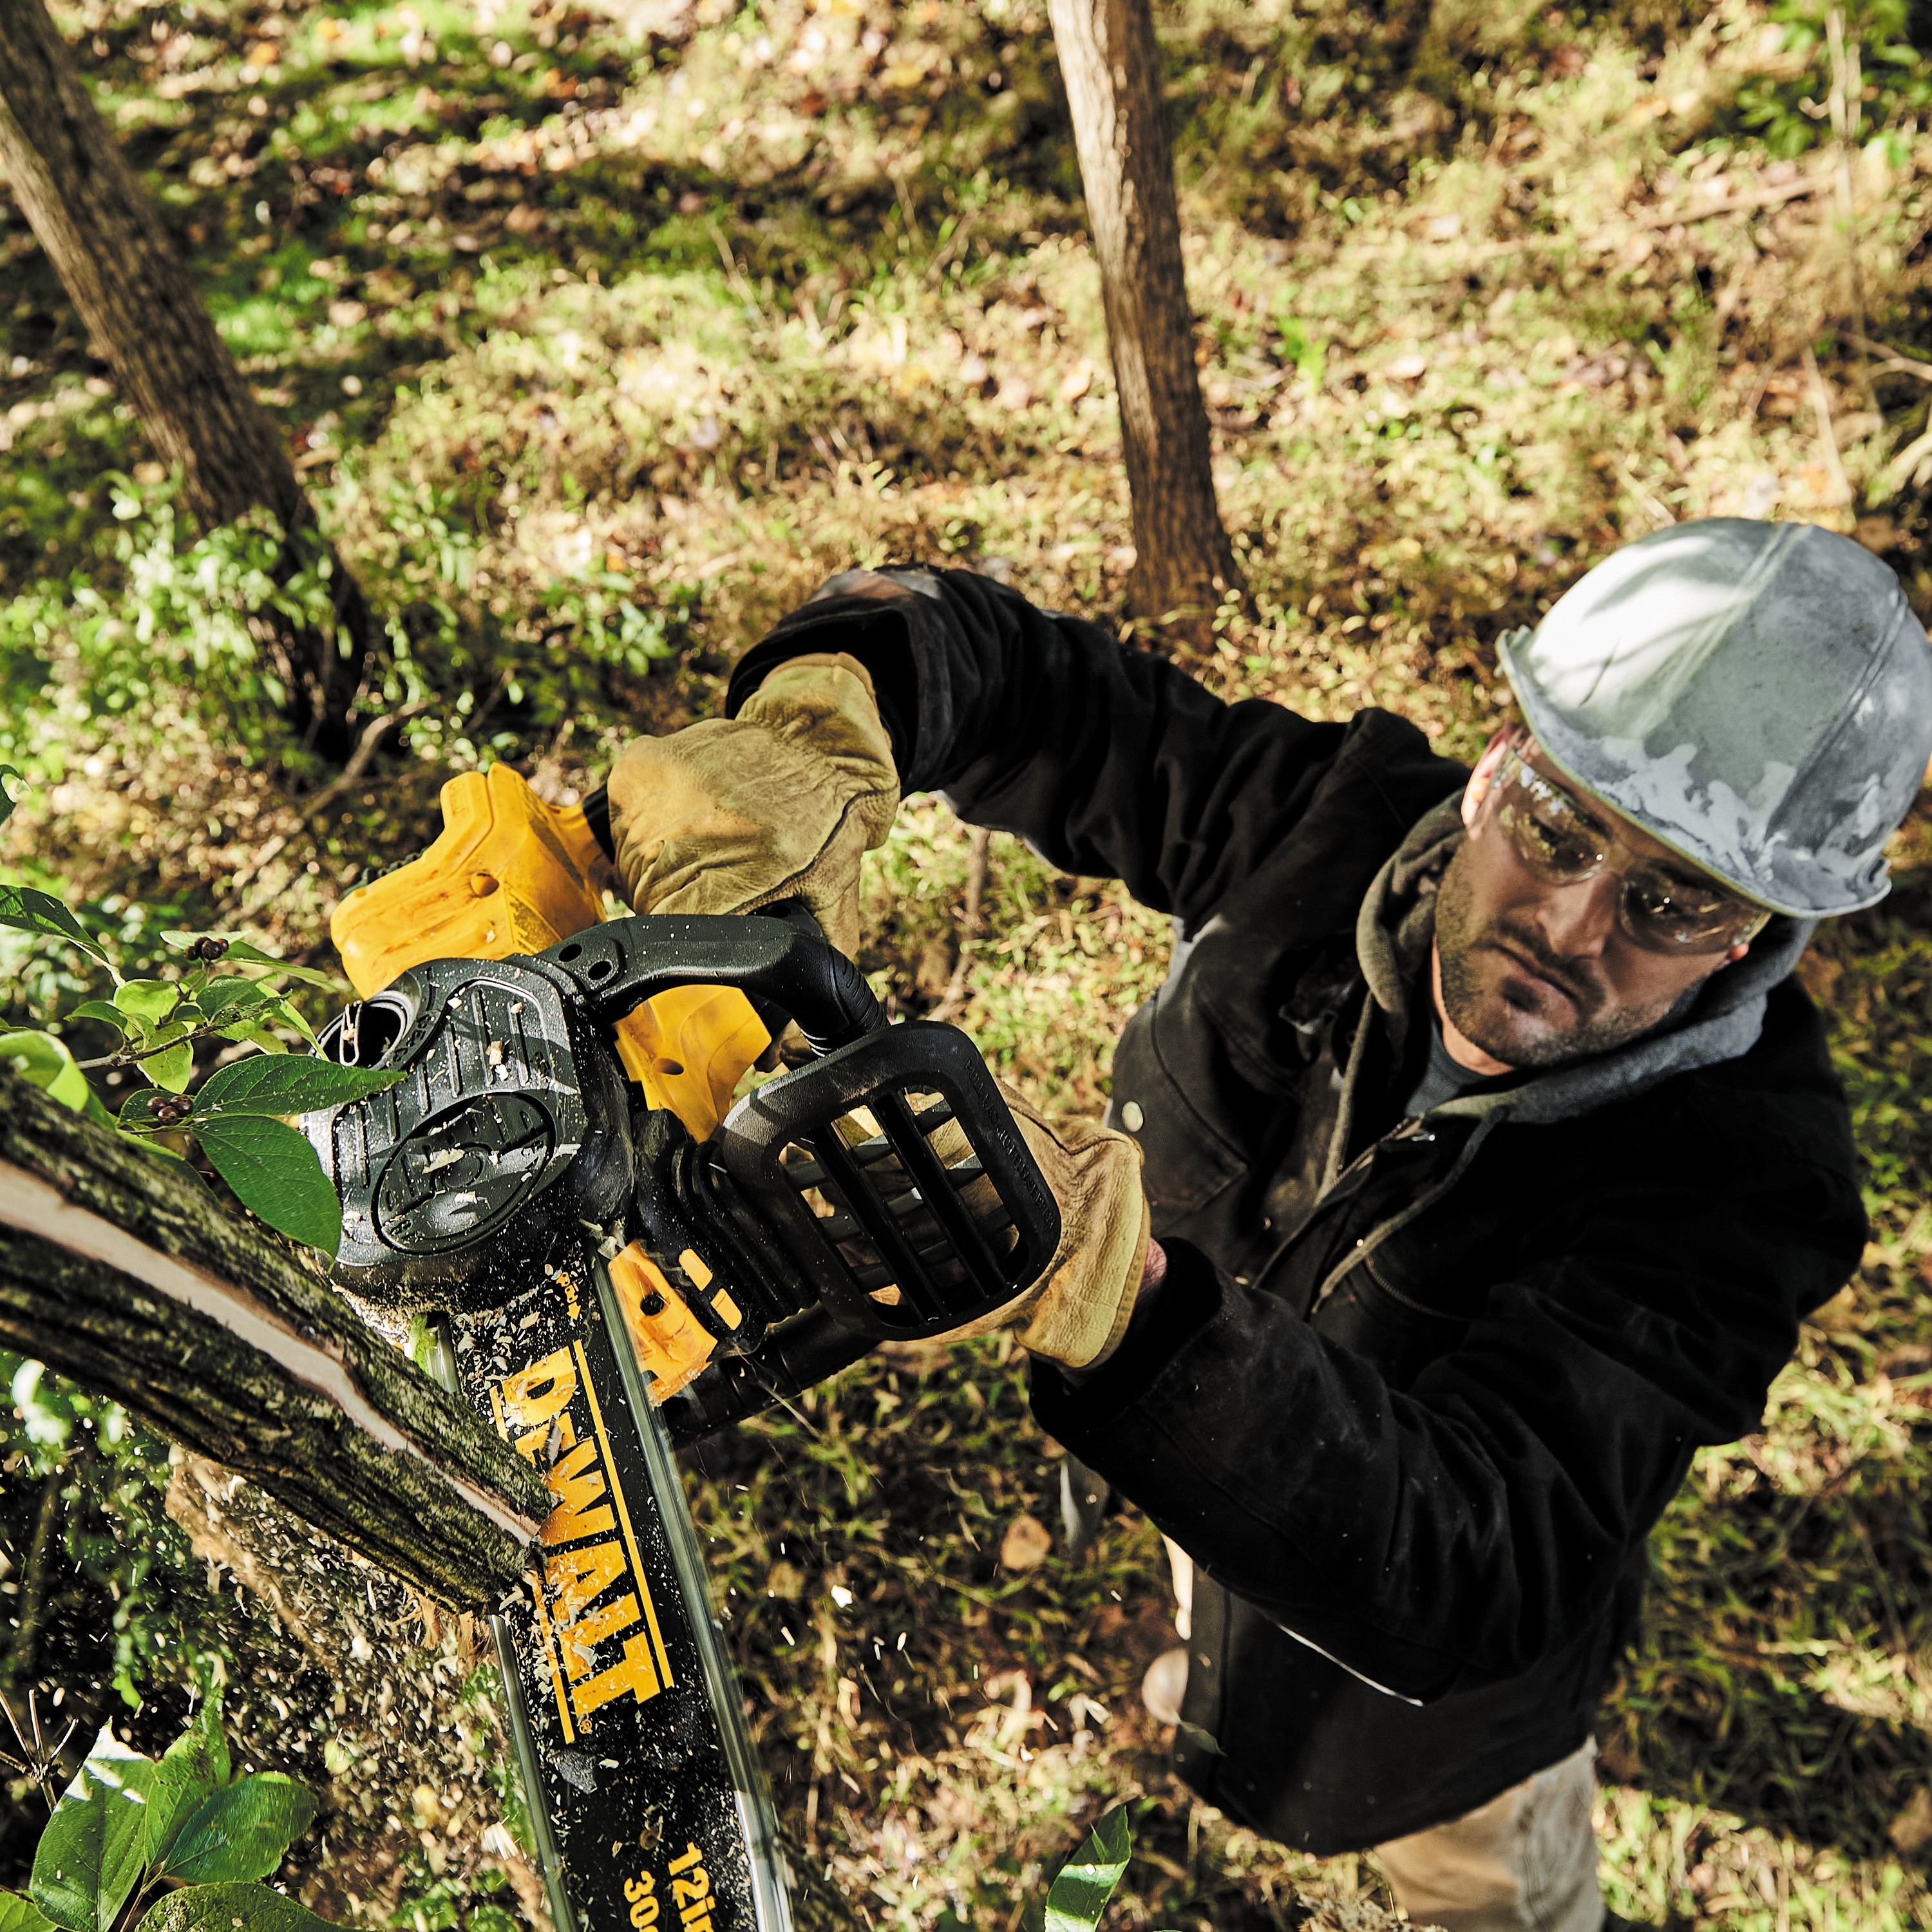 XR® Compact 12 inch Cordless Chainsaw being used by a person to slice through a square wooden log outdoors